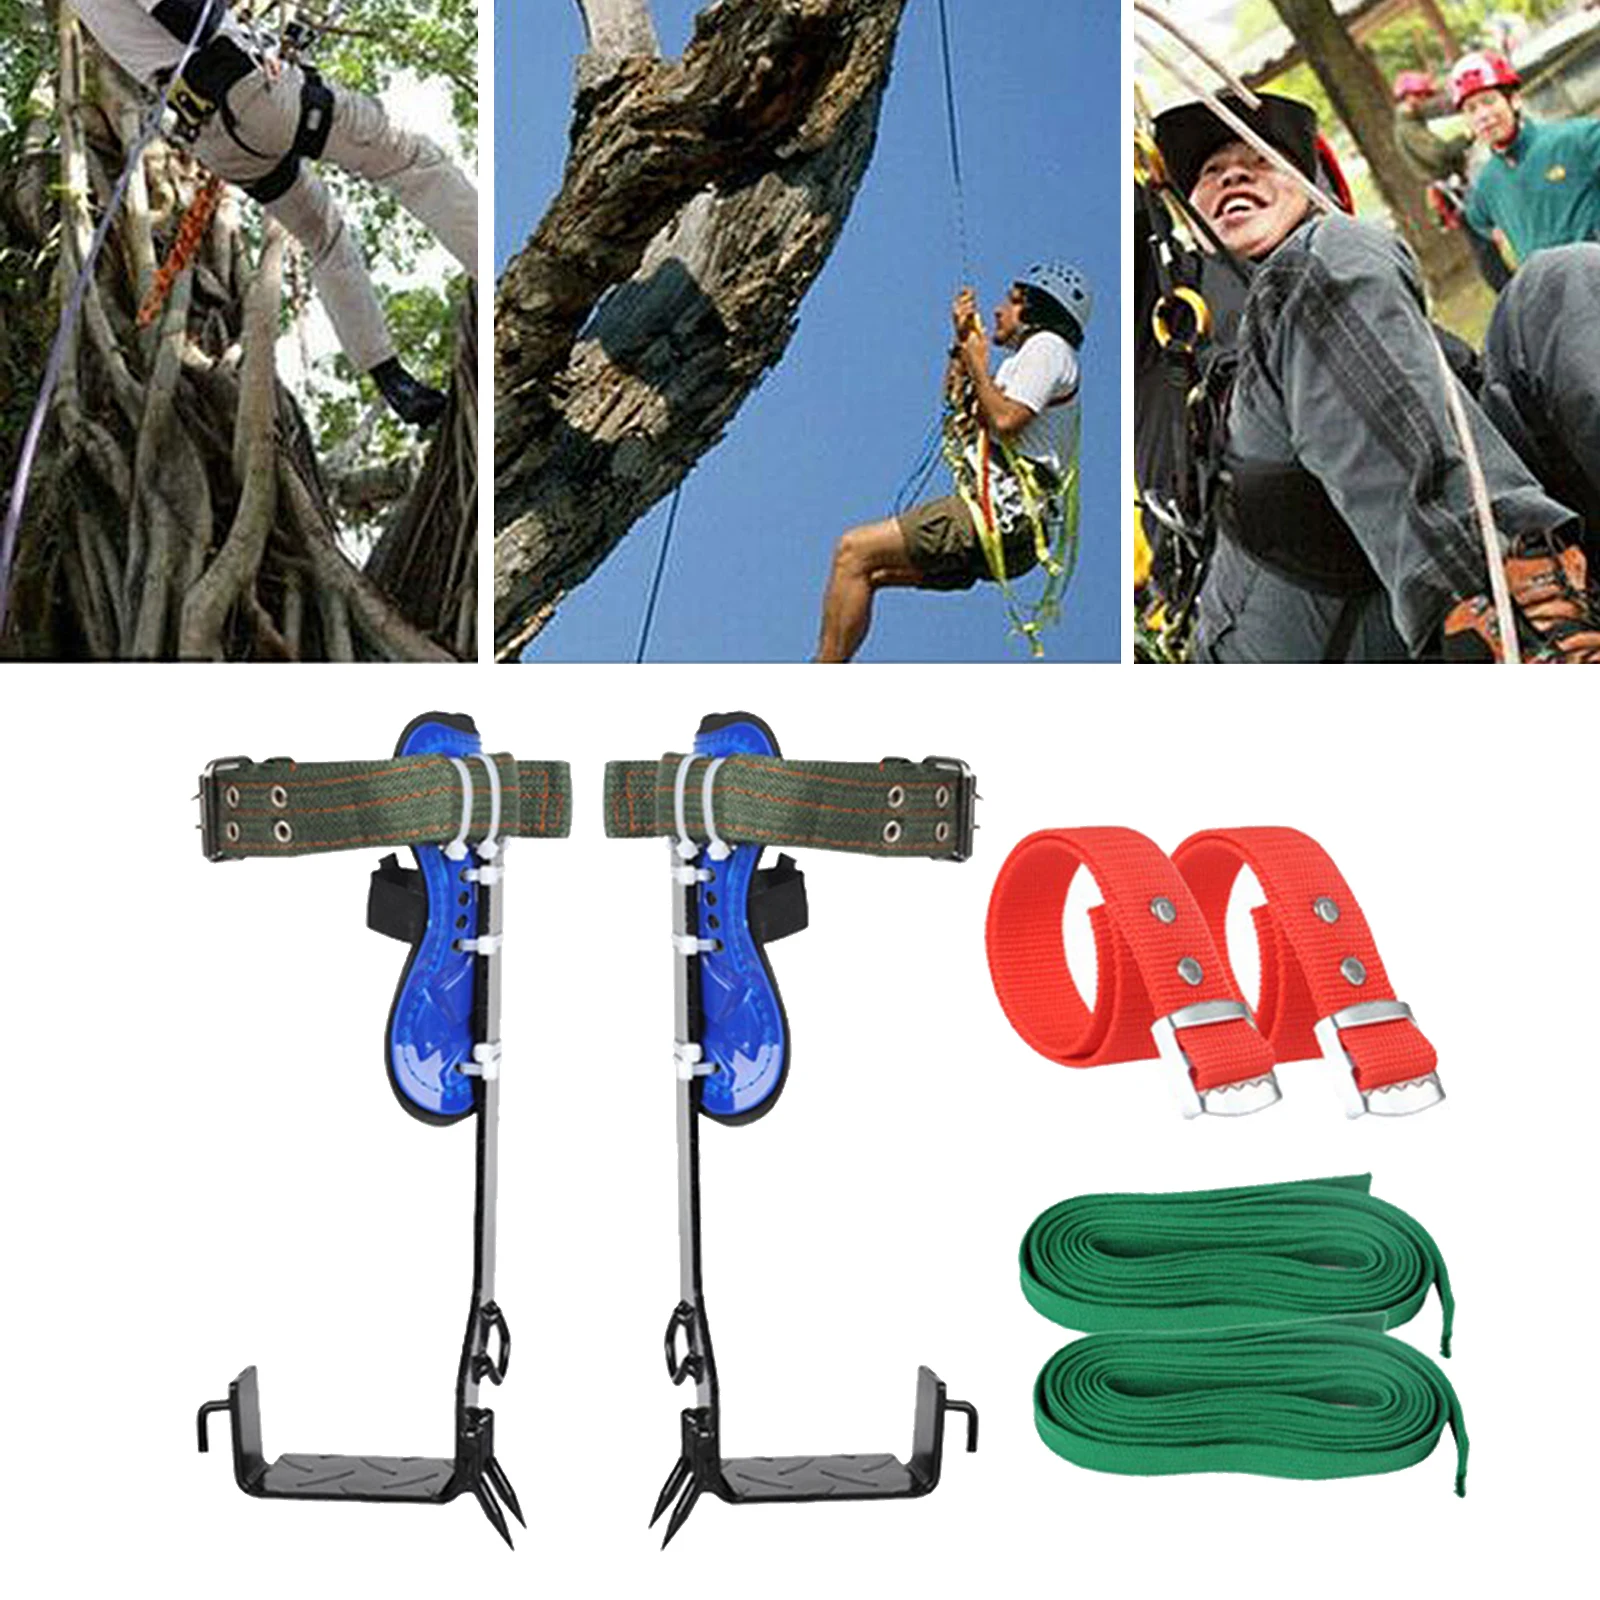 Details about   Tree Climbing Spikes Strong Bearing Capacity Durable Climb Tree Steel K2U7 